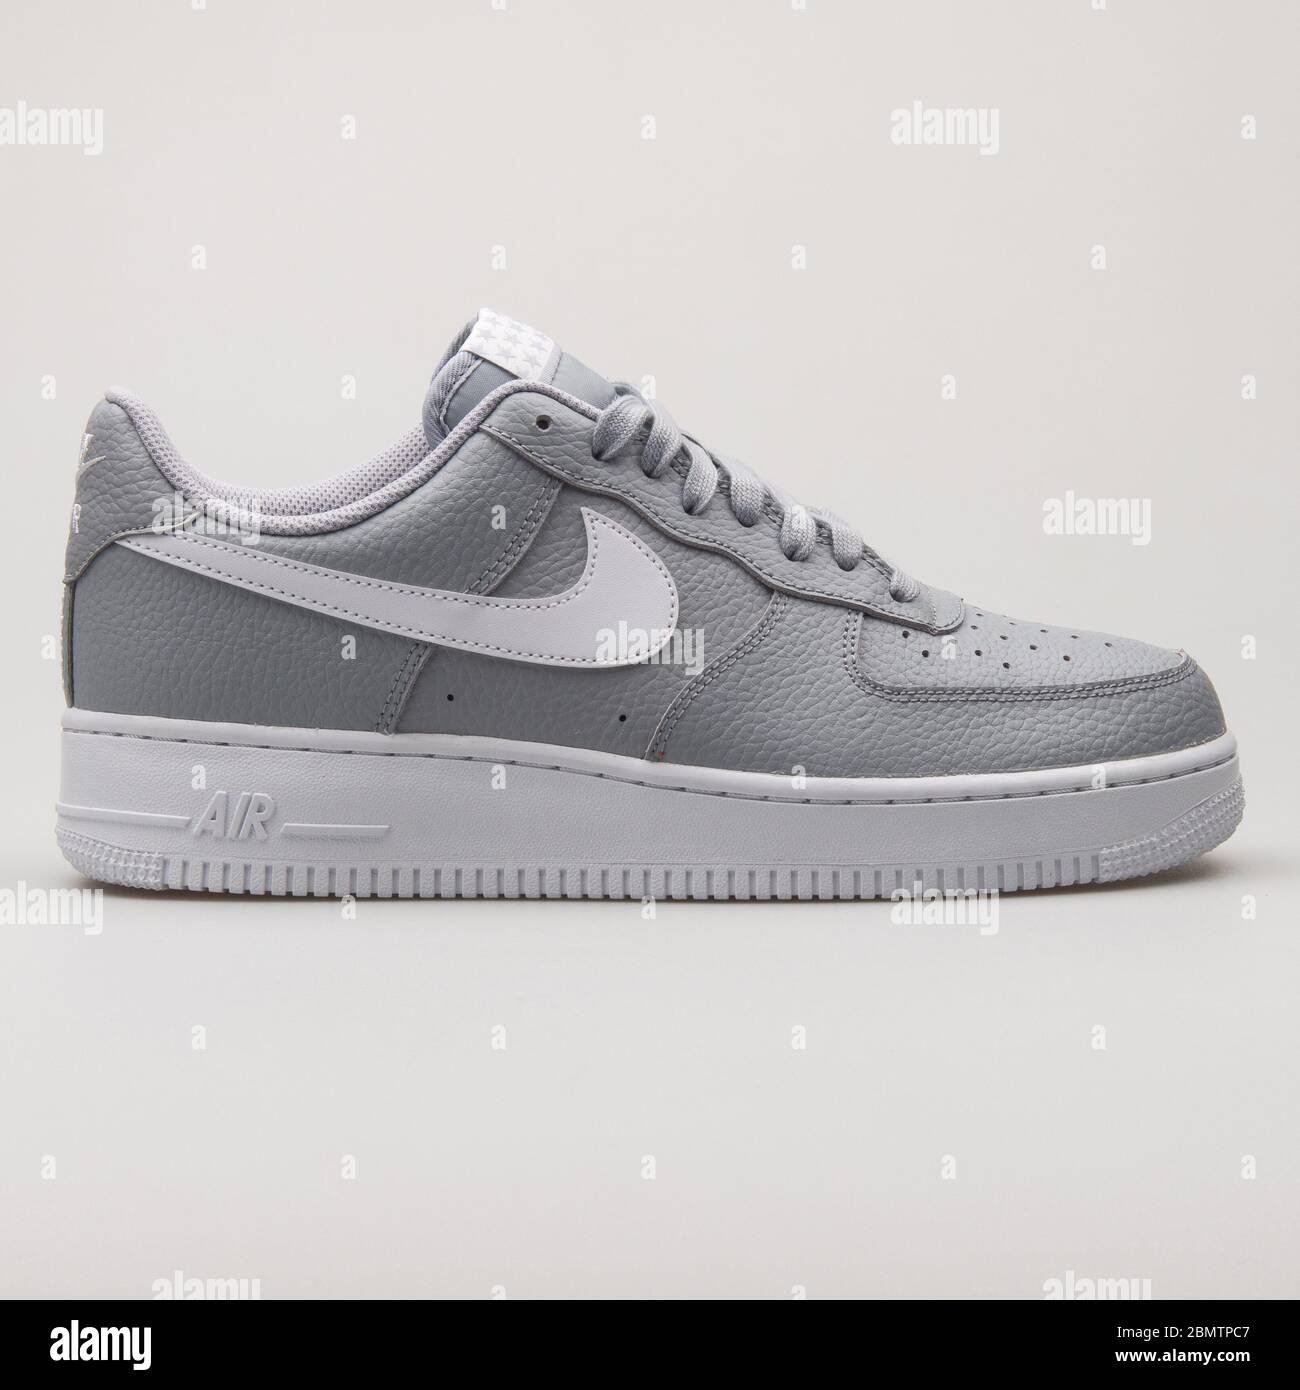 VIENNA, AUSTRIA - 2018: Nike Air Force 1 07 grey and white sneaker on background Stock Photo -